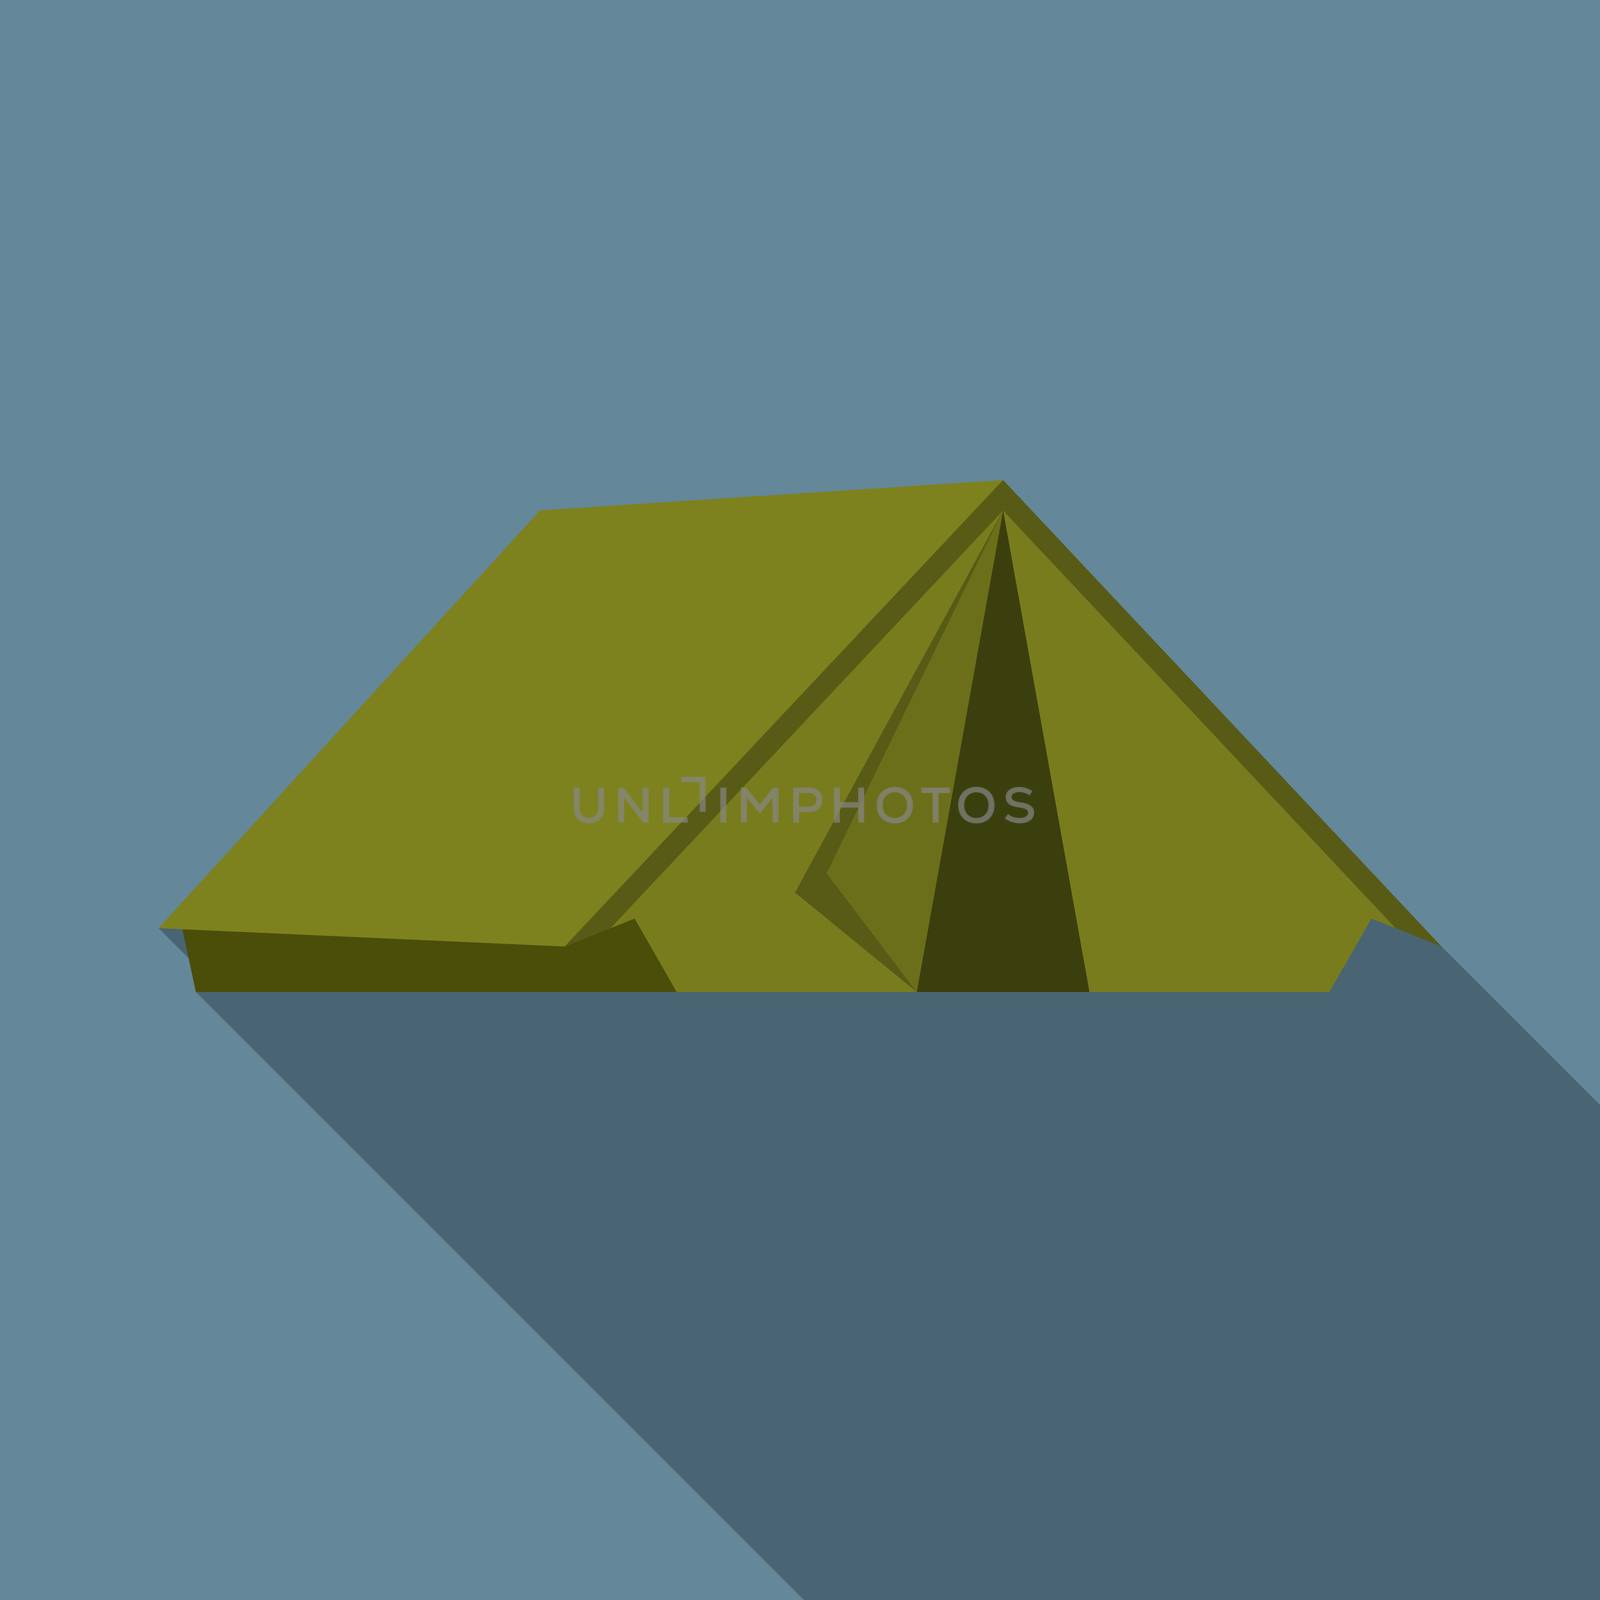 Flat design modern vector illustration of tent icon, camping and hiking equipment with long shadow.